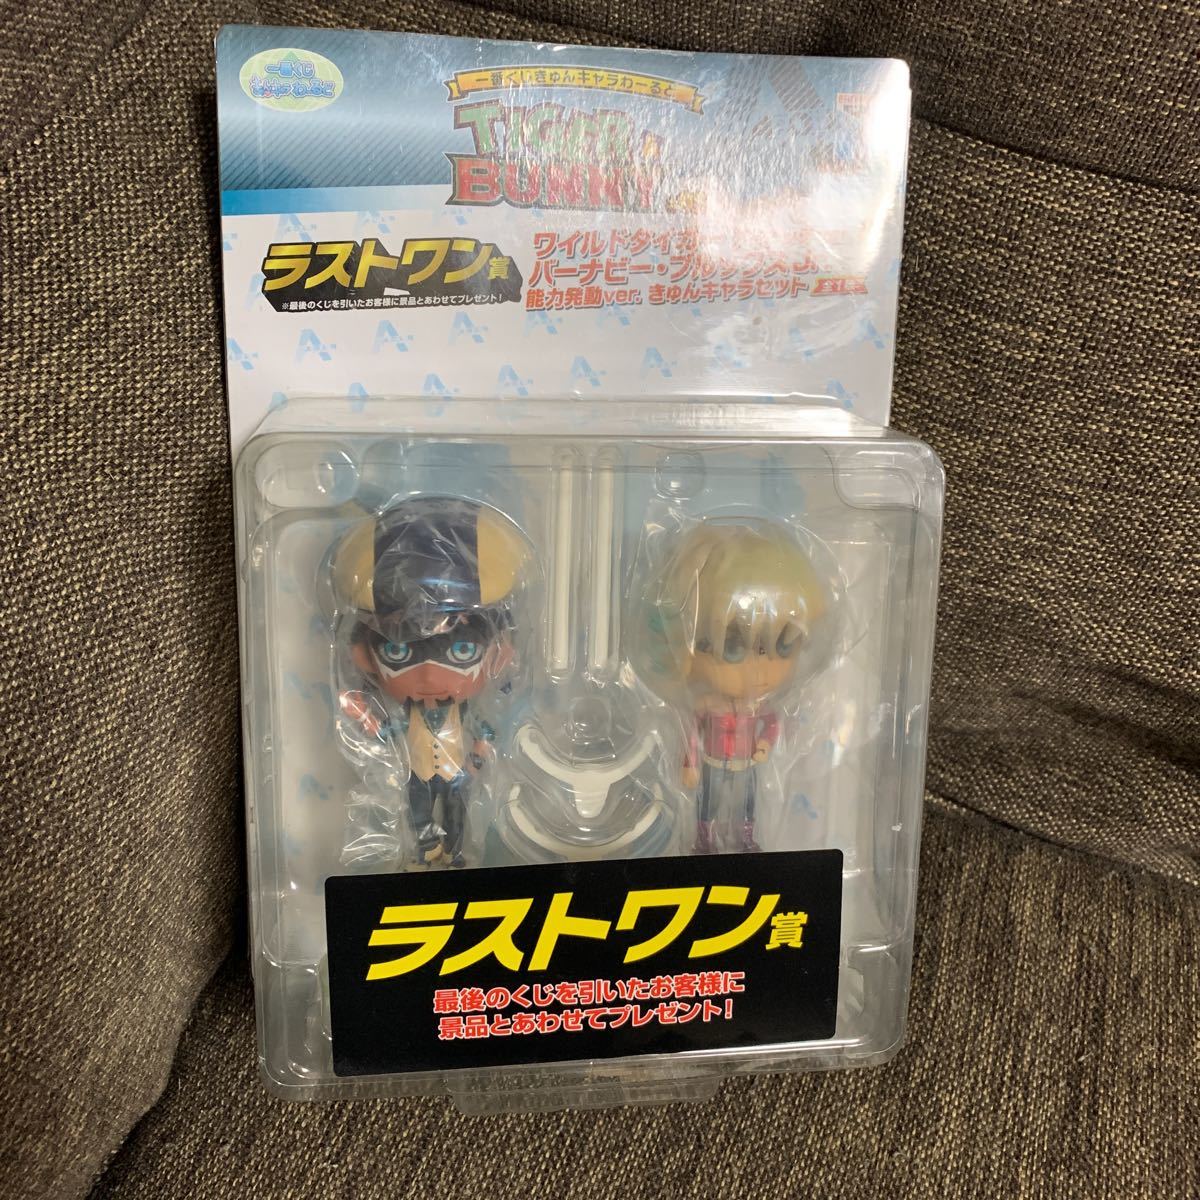  most lot TIGER & BUNNY last one . wild Tiger & burner Be ability departure moving ver.... Cara set figure new goods unopened rare 